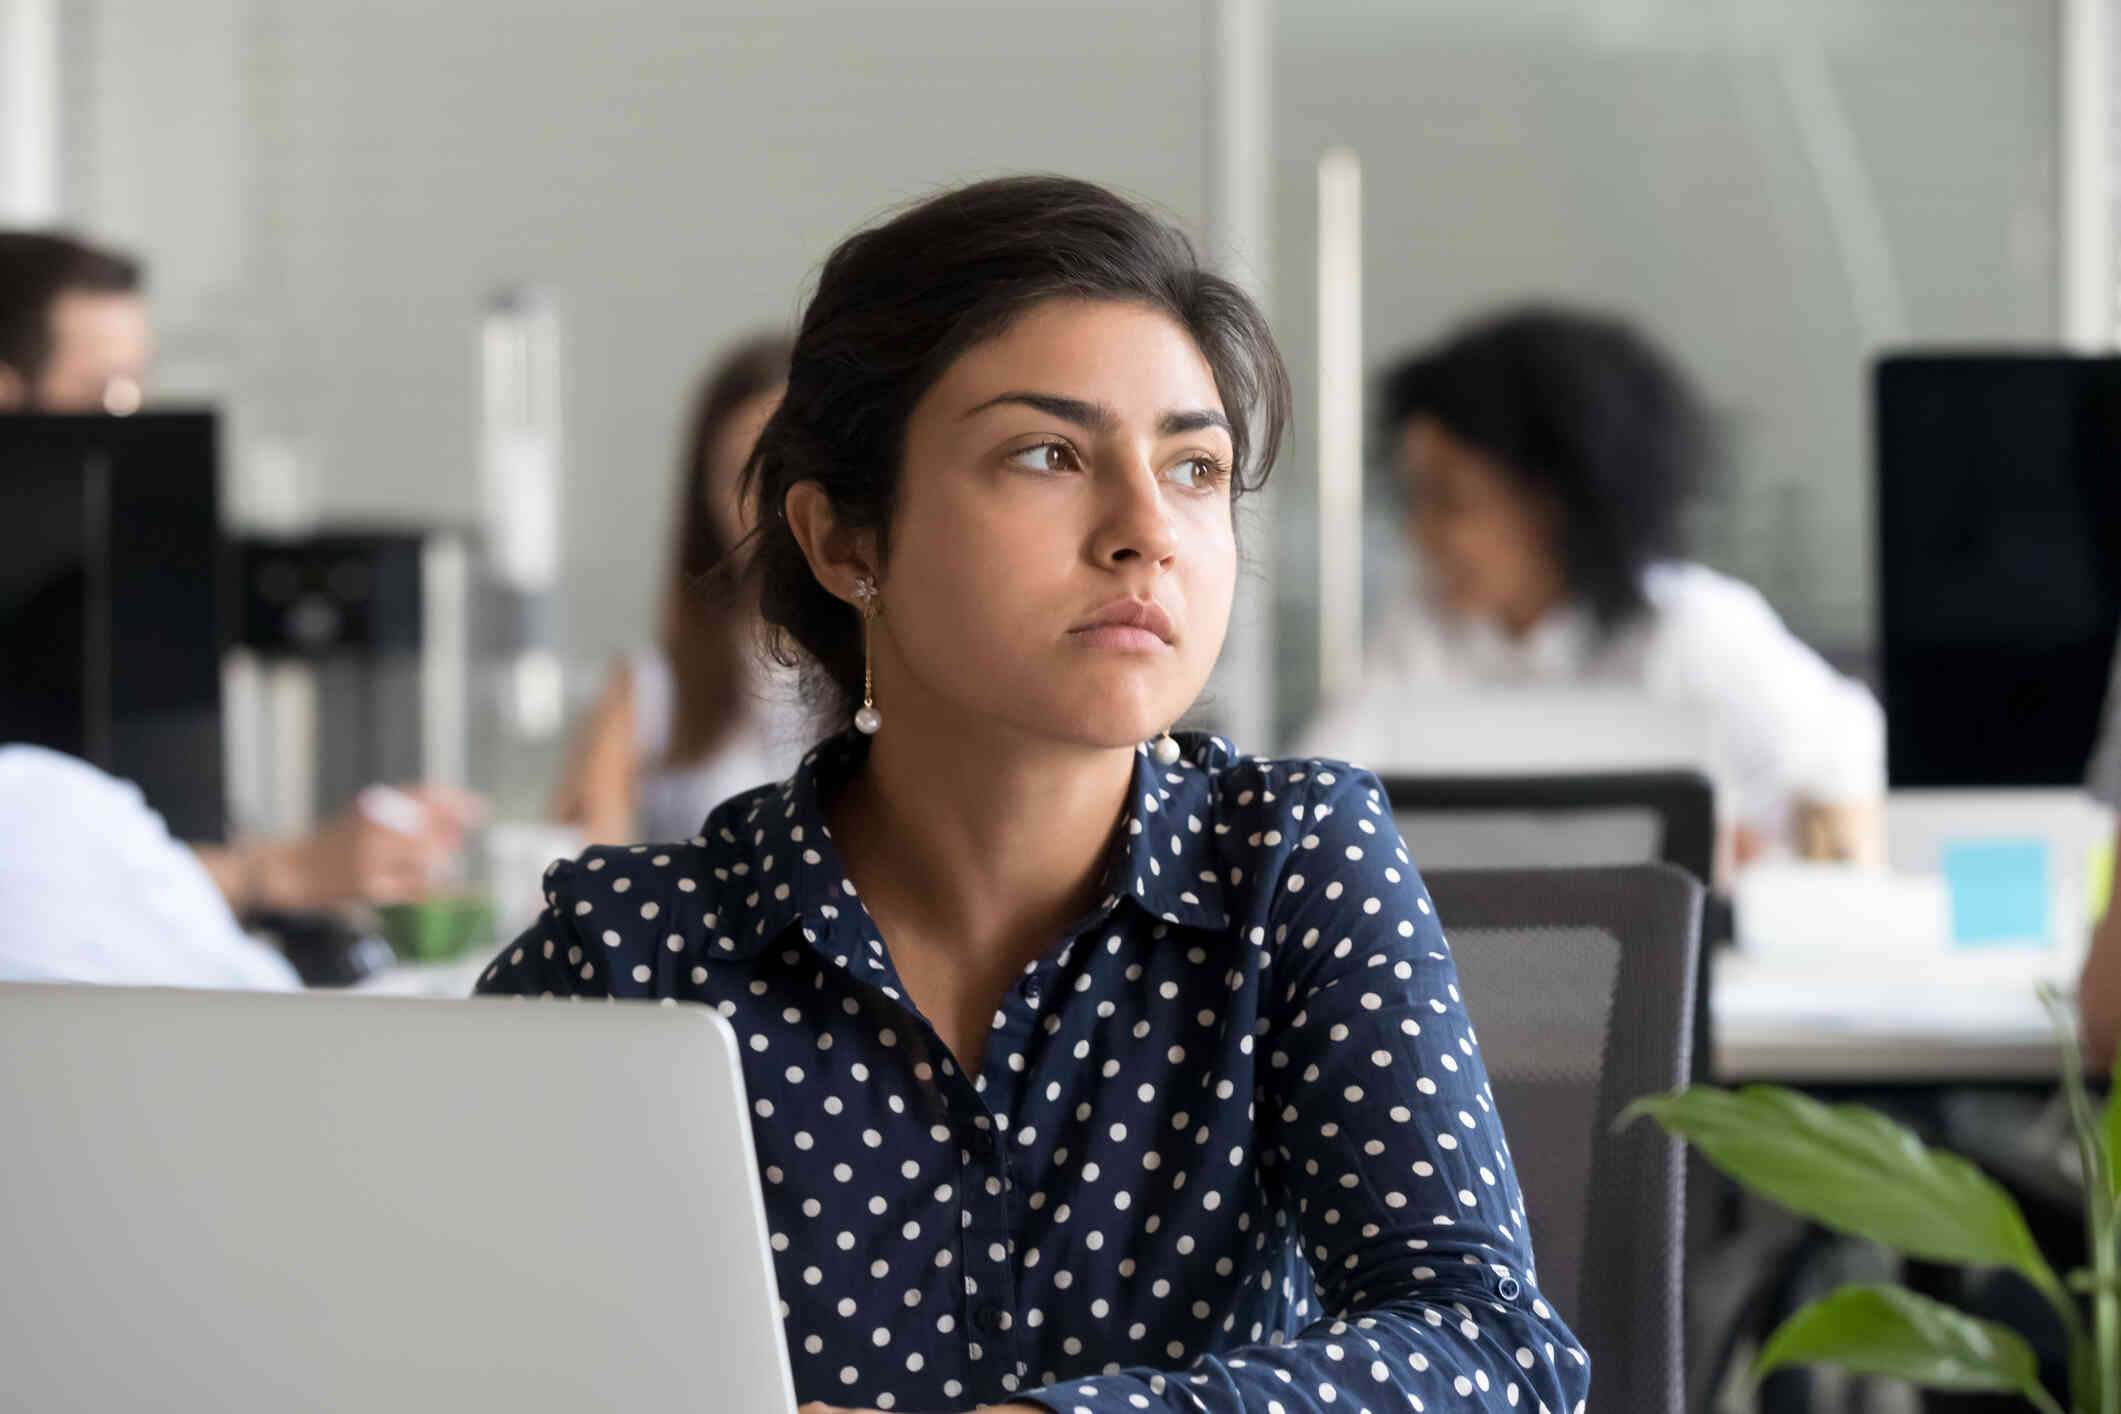 A woman sits at her desk at work behind her computer and gazes off with a sad expression.